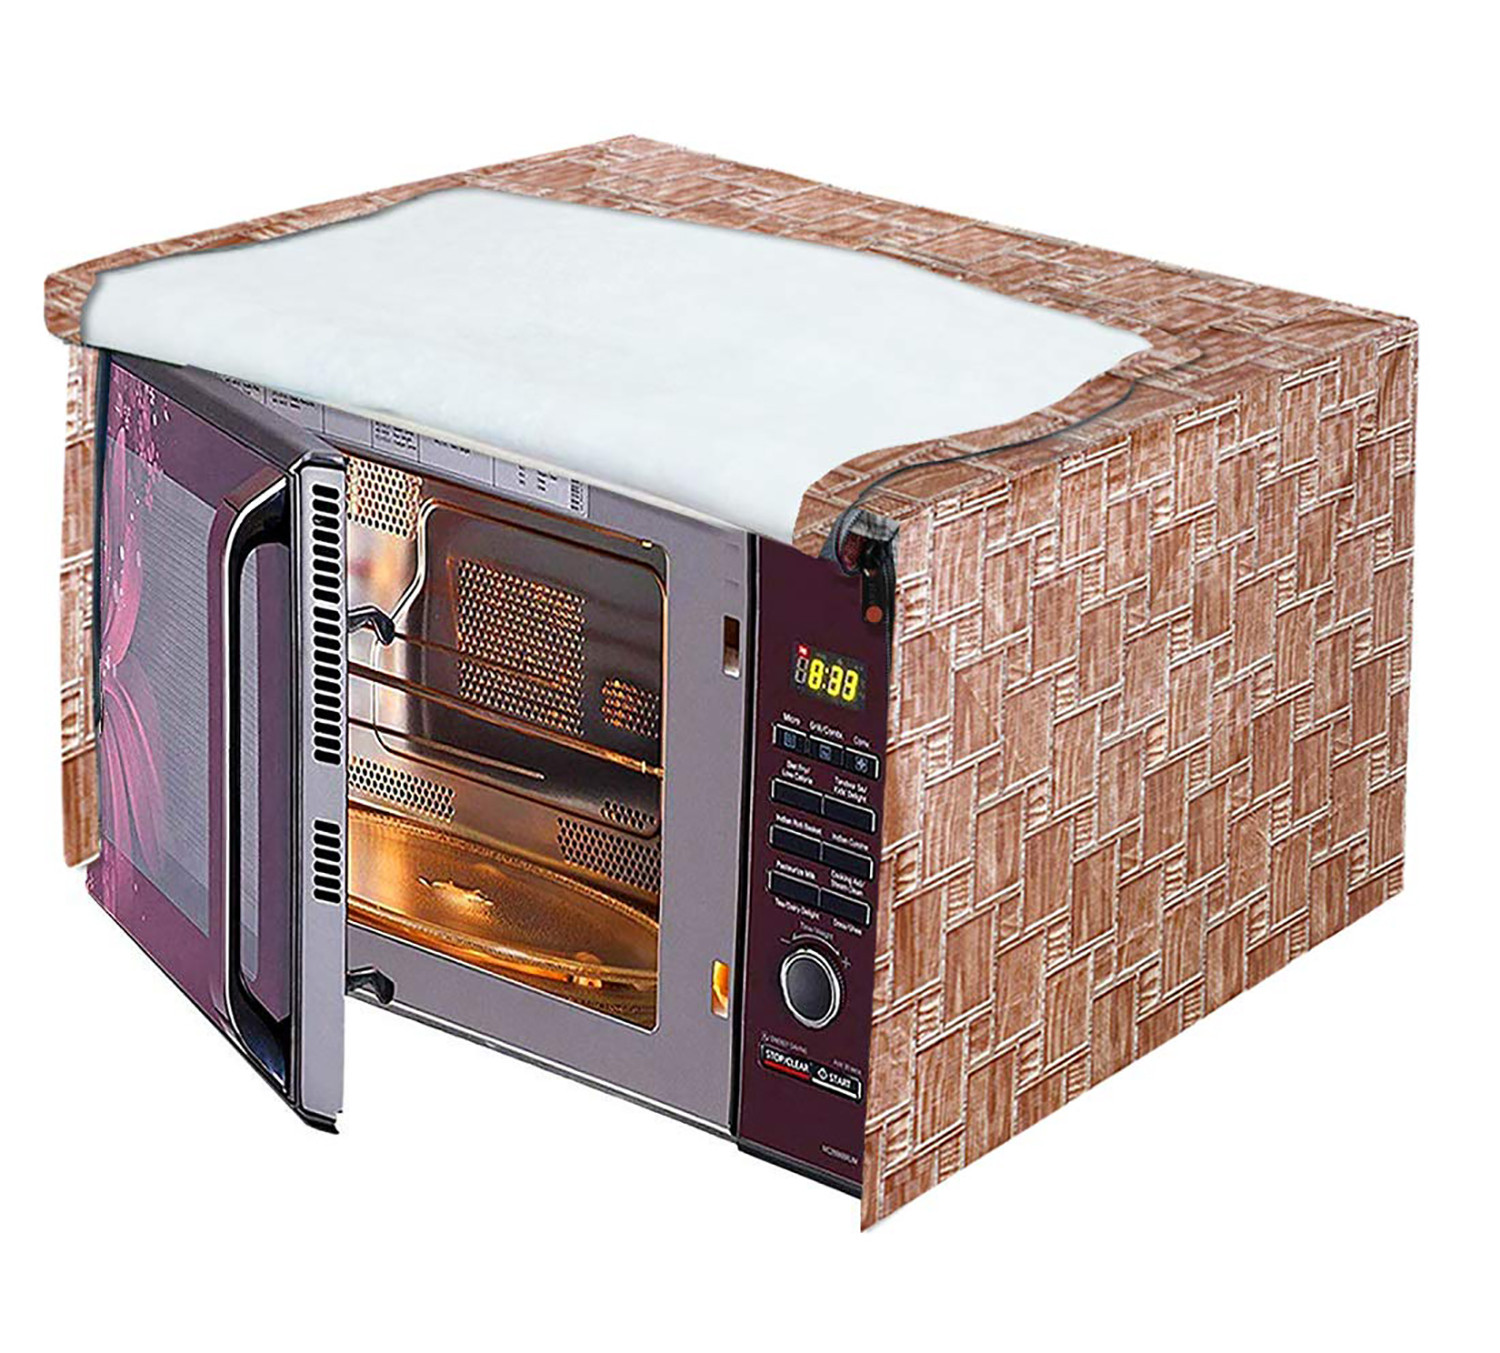 Kuber Industries PVC Wooden Check Printed Microwave Oven Cover,25 Ltr. (Brown)-HS43KUBMART25989